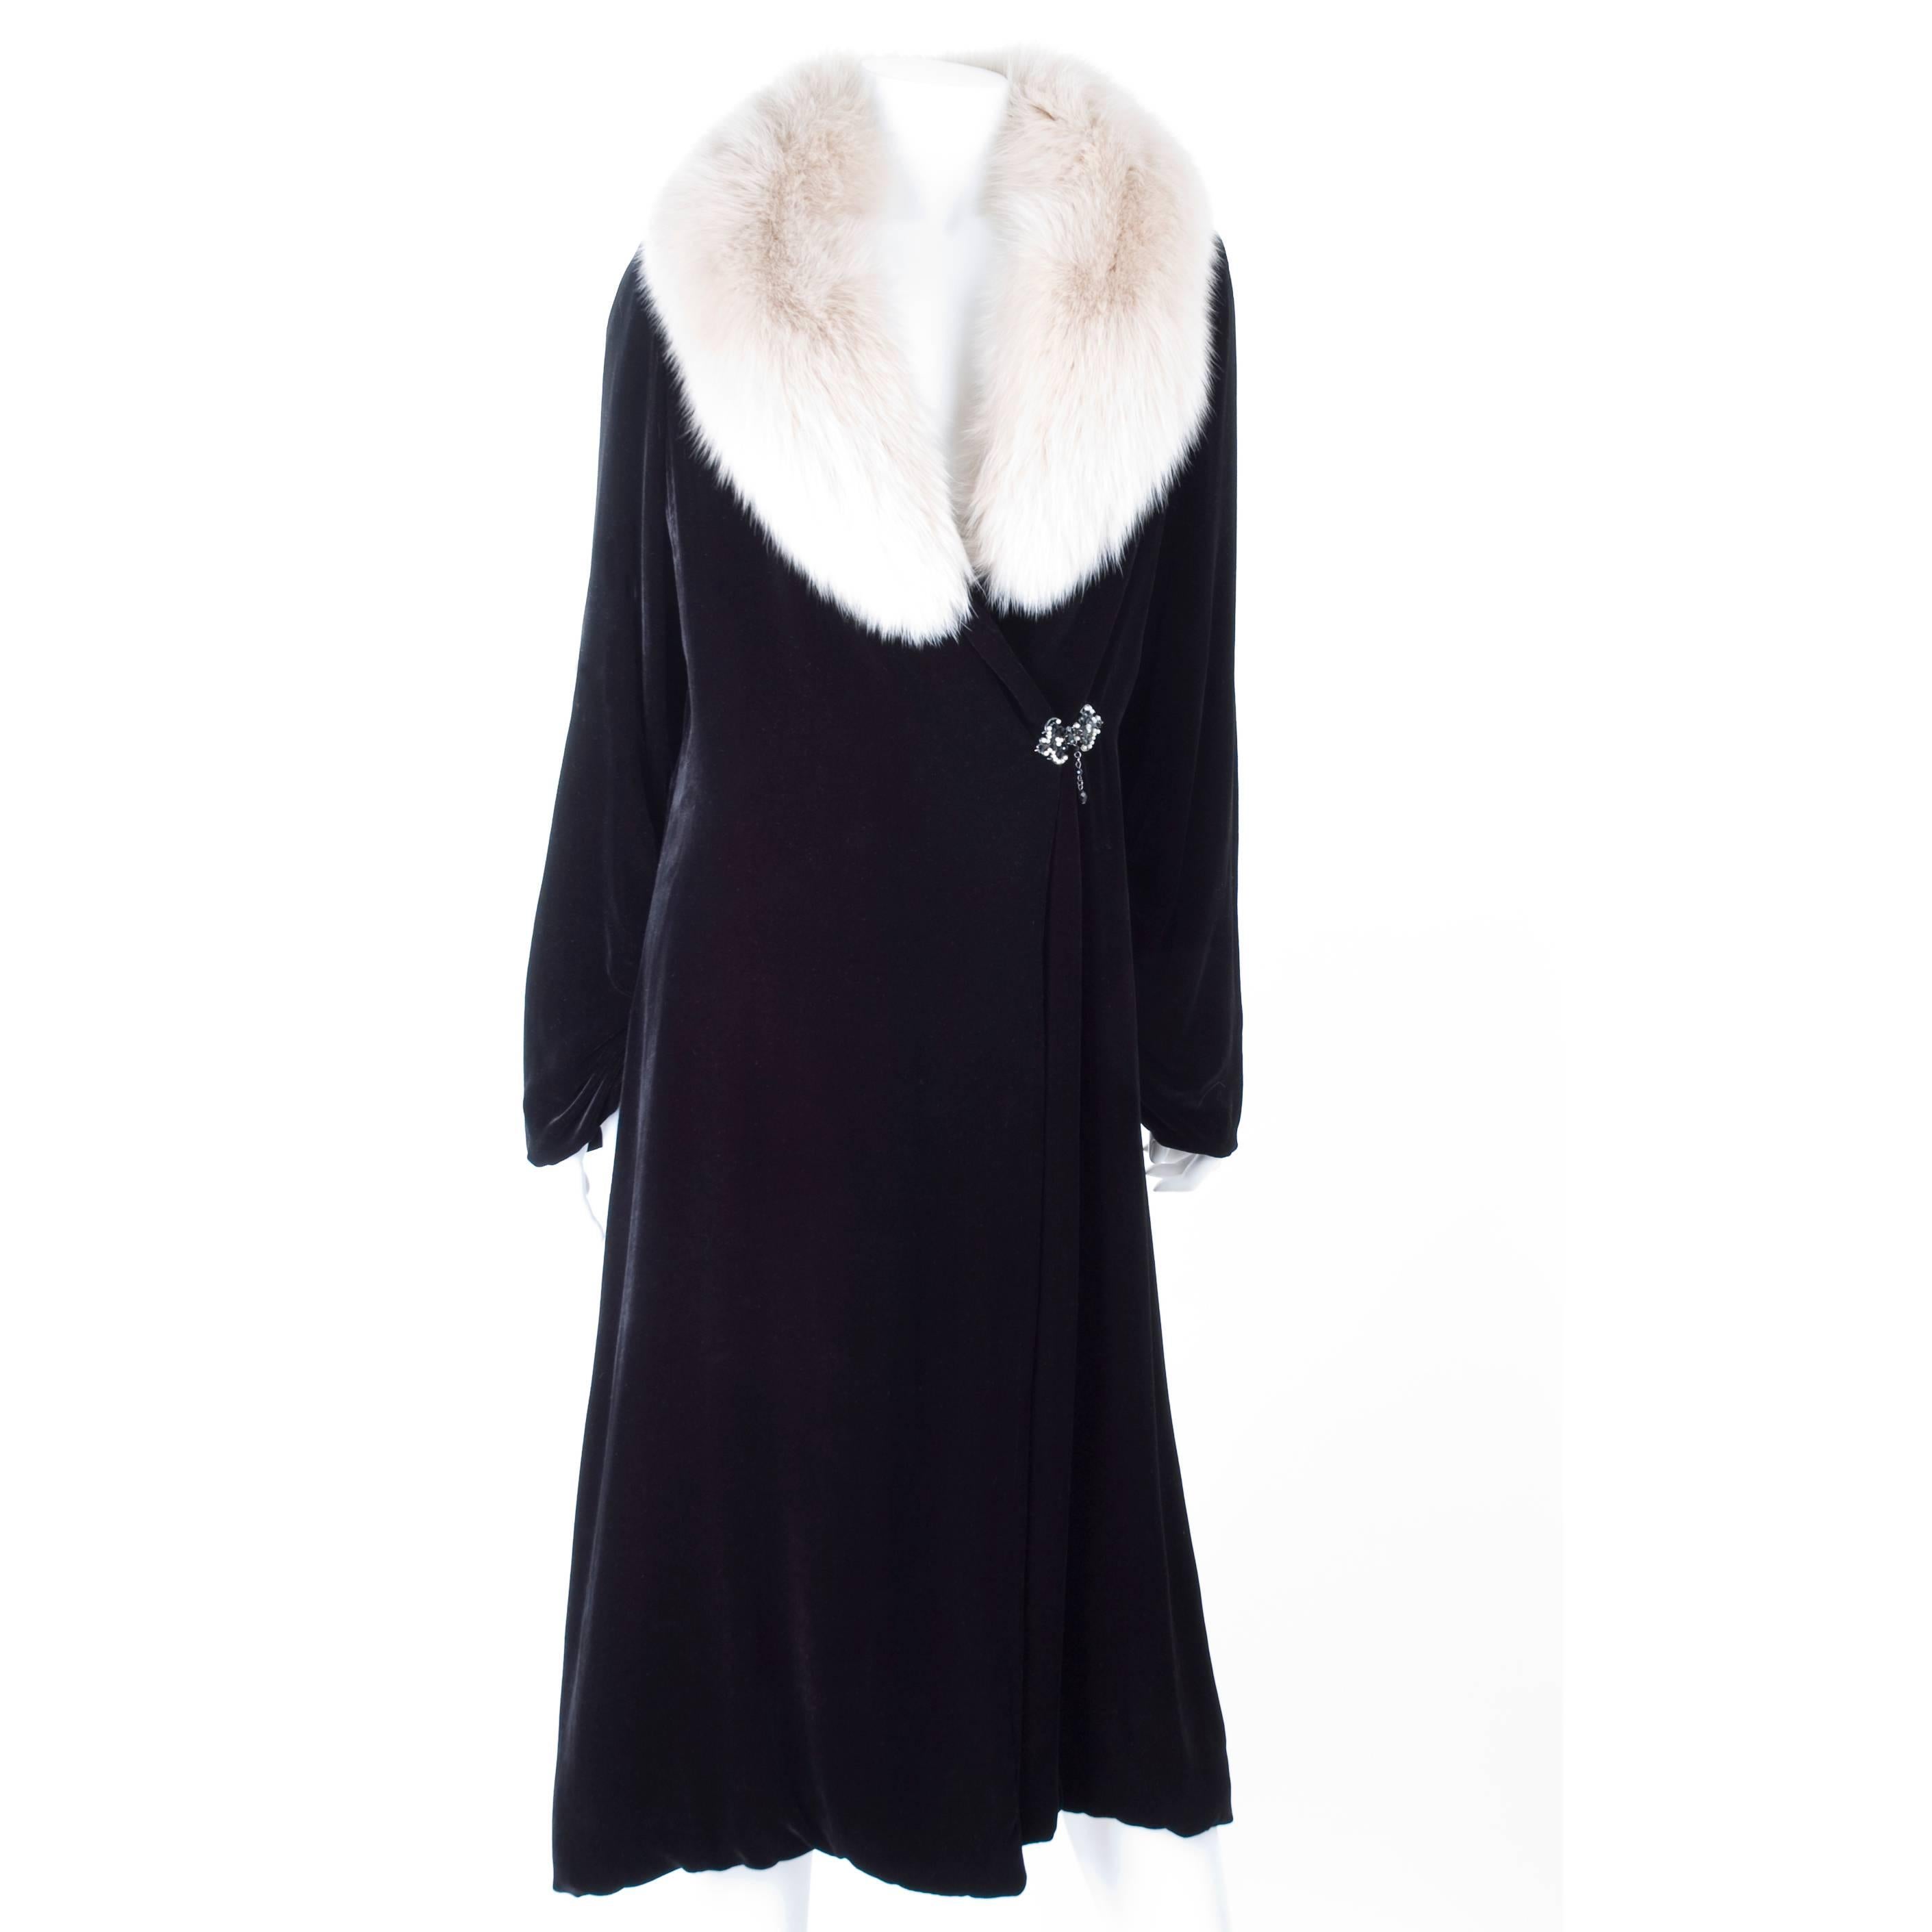 Bluemarine Velvet and Fur Evening Coat as seen on MADONNA.
Black rayon with silk velvet and fox fur collar. Beautiful brooch with hook in the waist line as the closure.
The coat is outside in excellent condition, the lining has some signs of